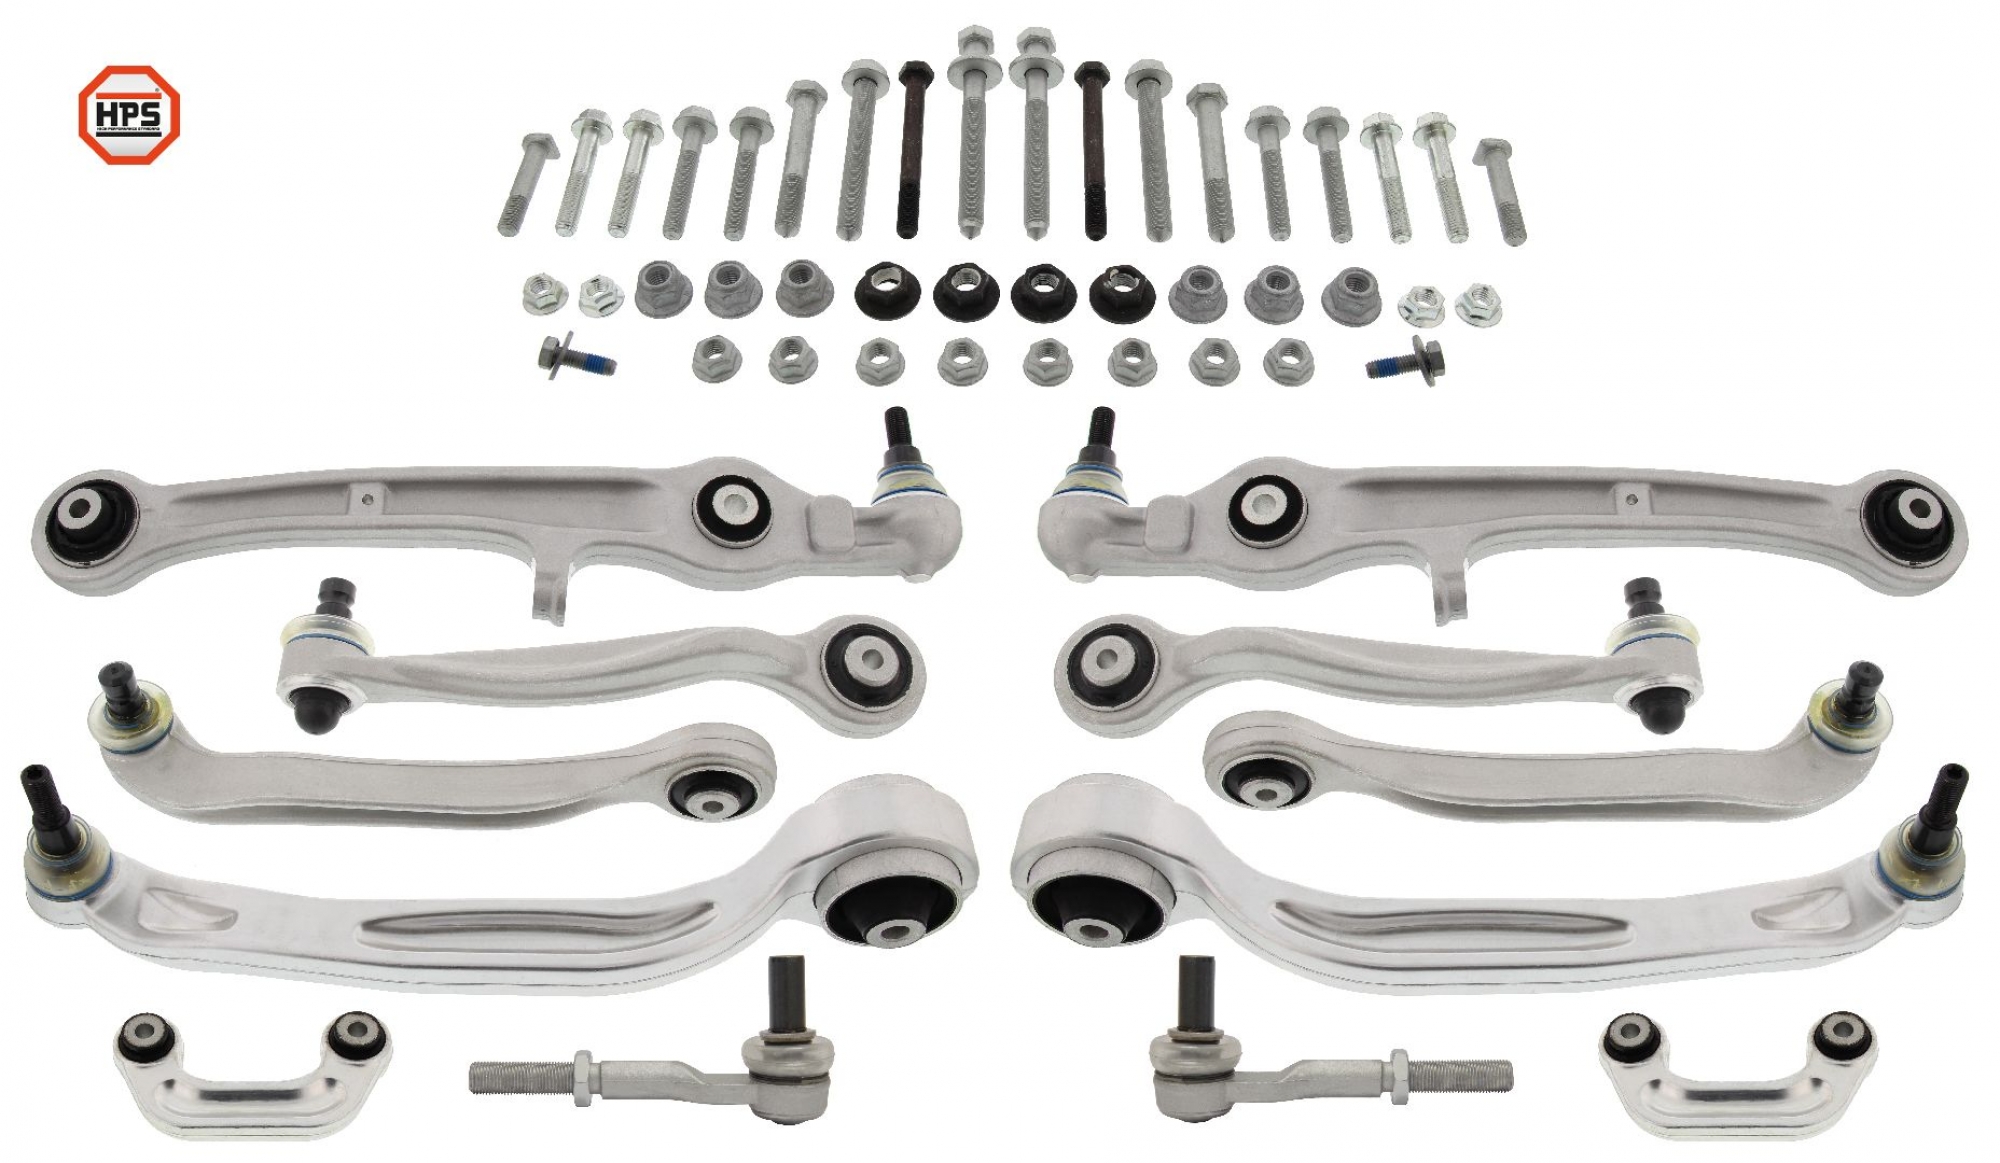 MAPCO 59828/1HPS MAPCO KIT REINFORCED WISHBONE CONTROL ARMS TIE ROD ENDS CONNECTORS + all screws